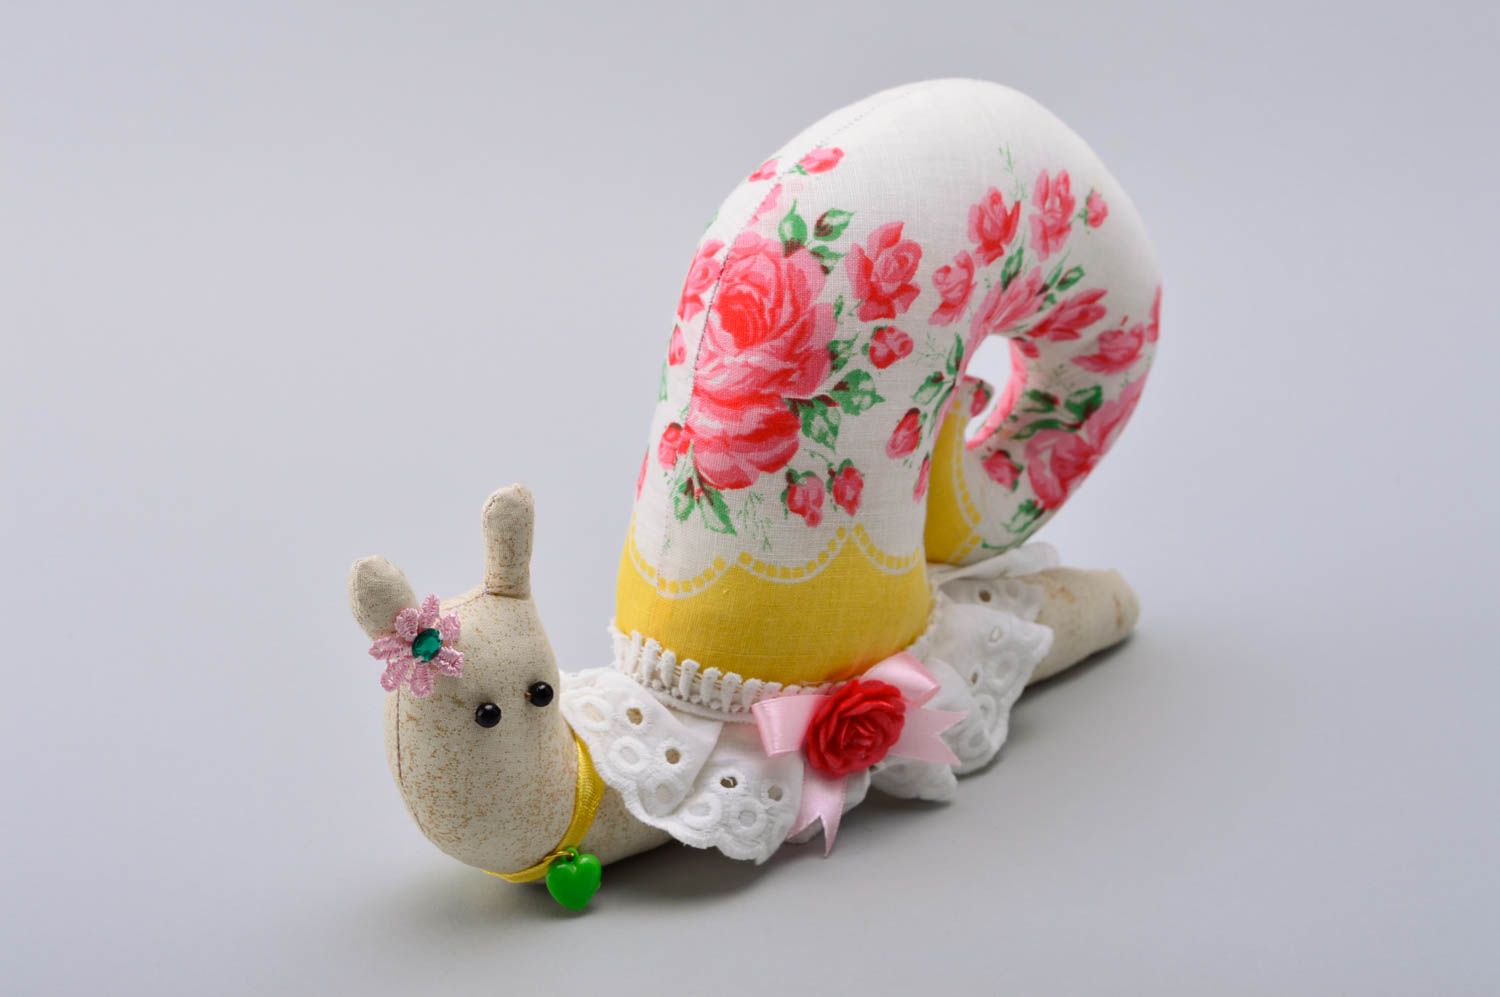 Soft toy handmade toy animal snail toy birthday gifts for kids home decor photo 5